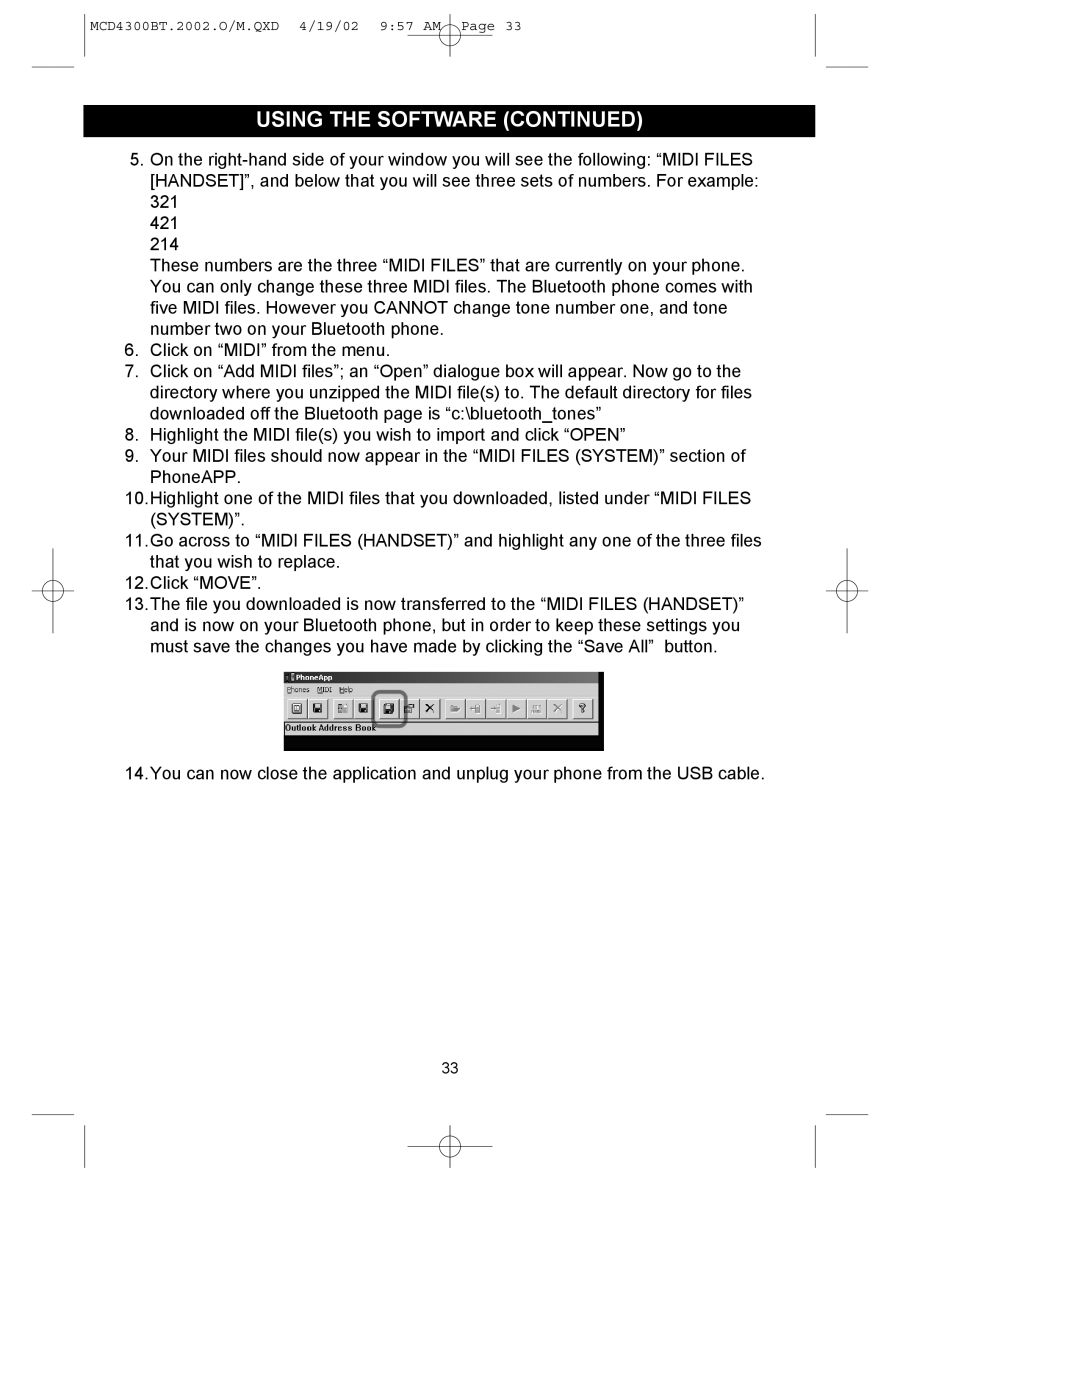 Memorex MCD4300BT operating instructions Using The Software Continued, Click on “MIDI” from the menu 